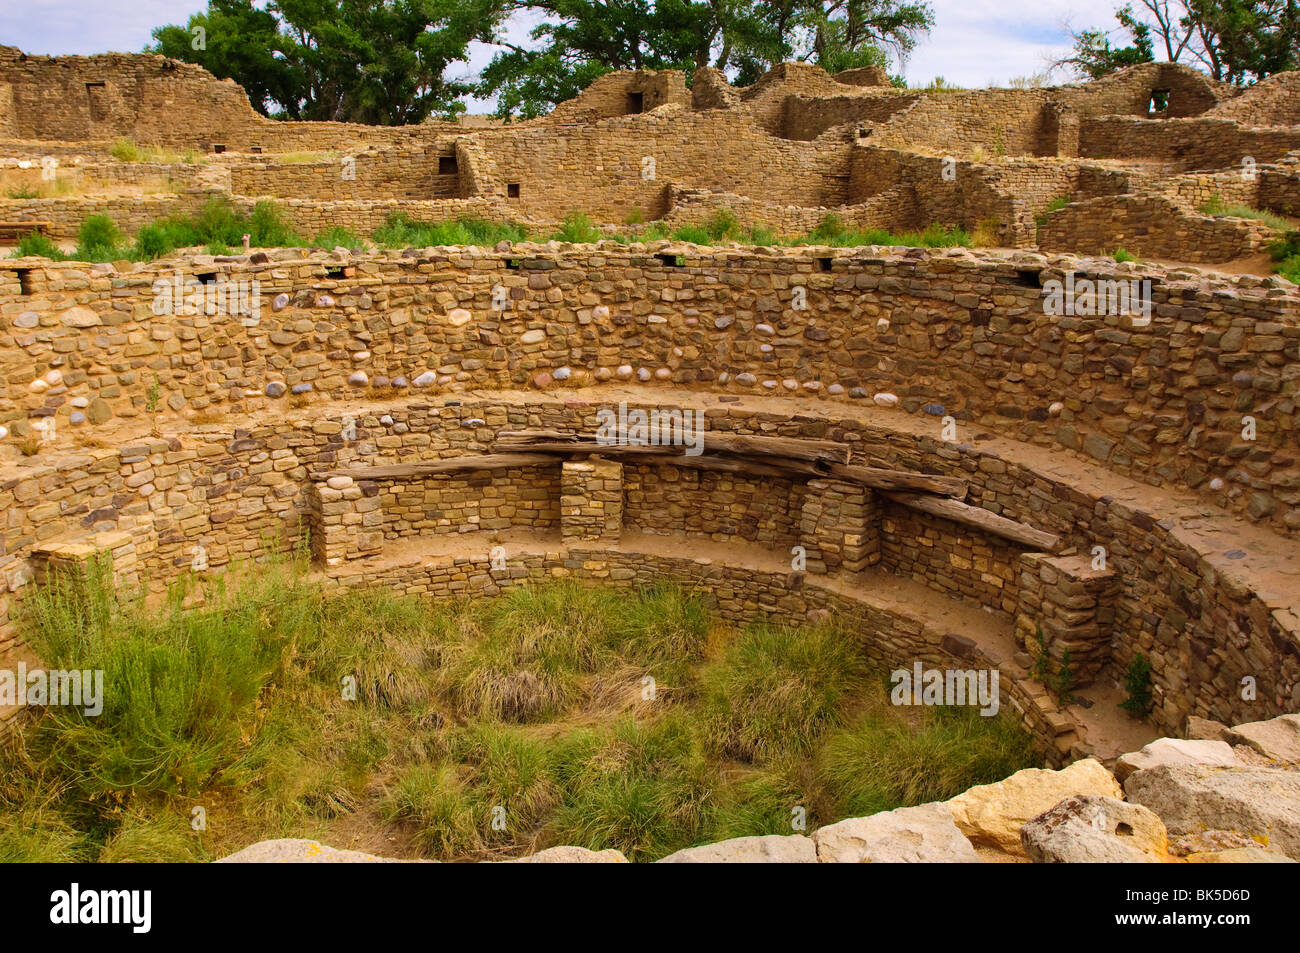 Aztec Ruins National Monument, New Mexico, United States of America, North America Stock Photo